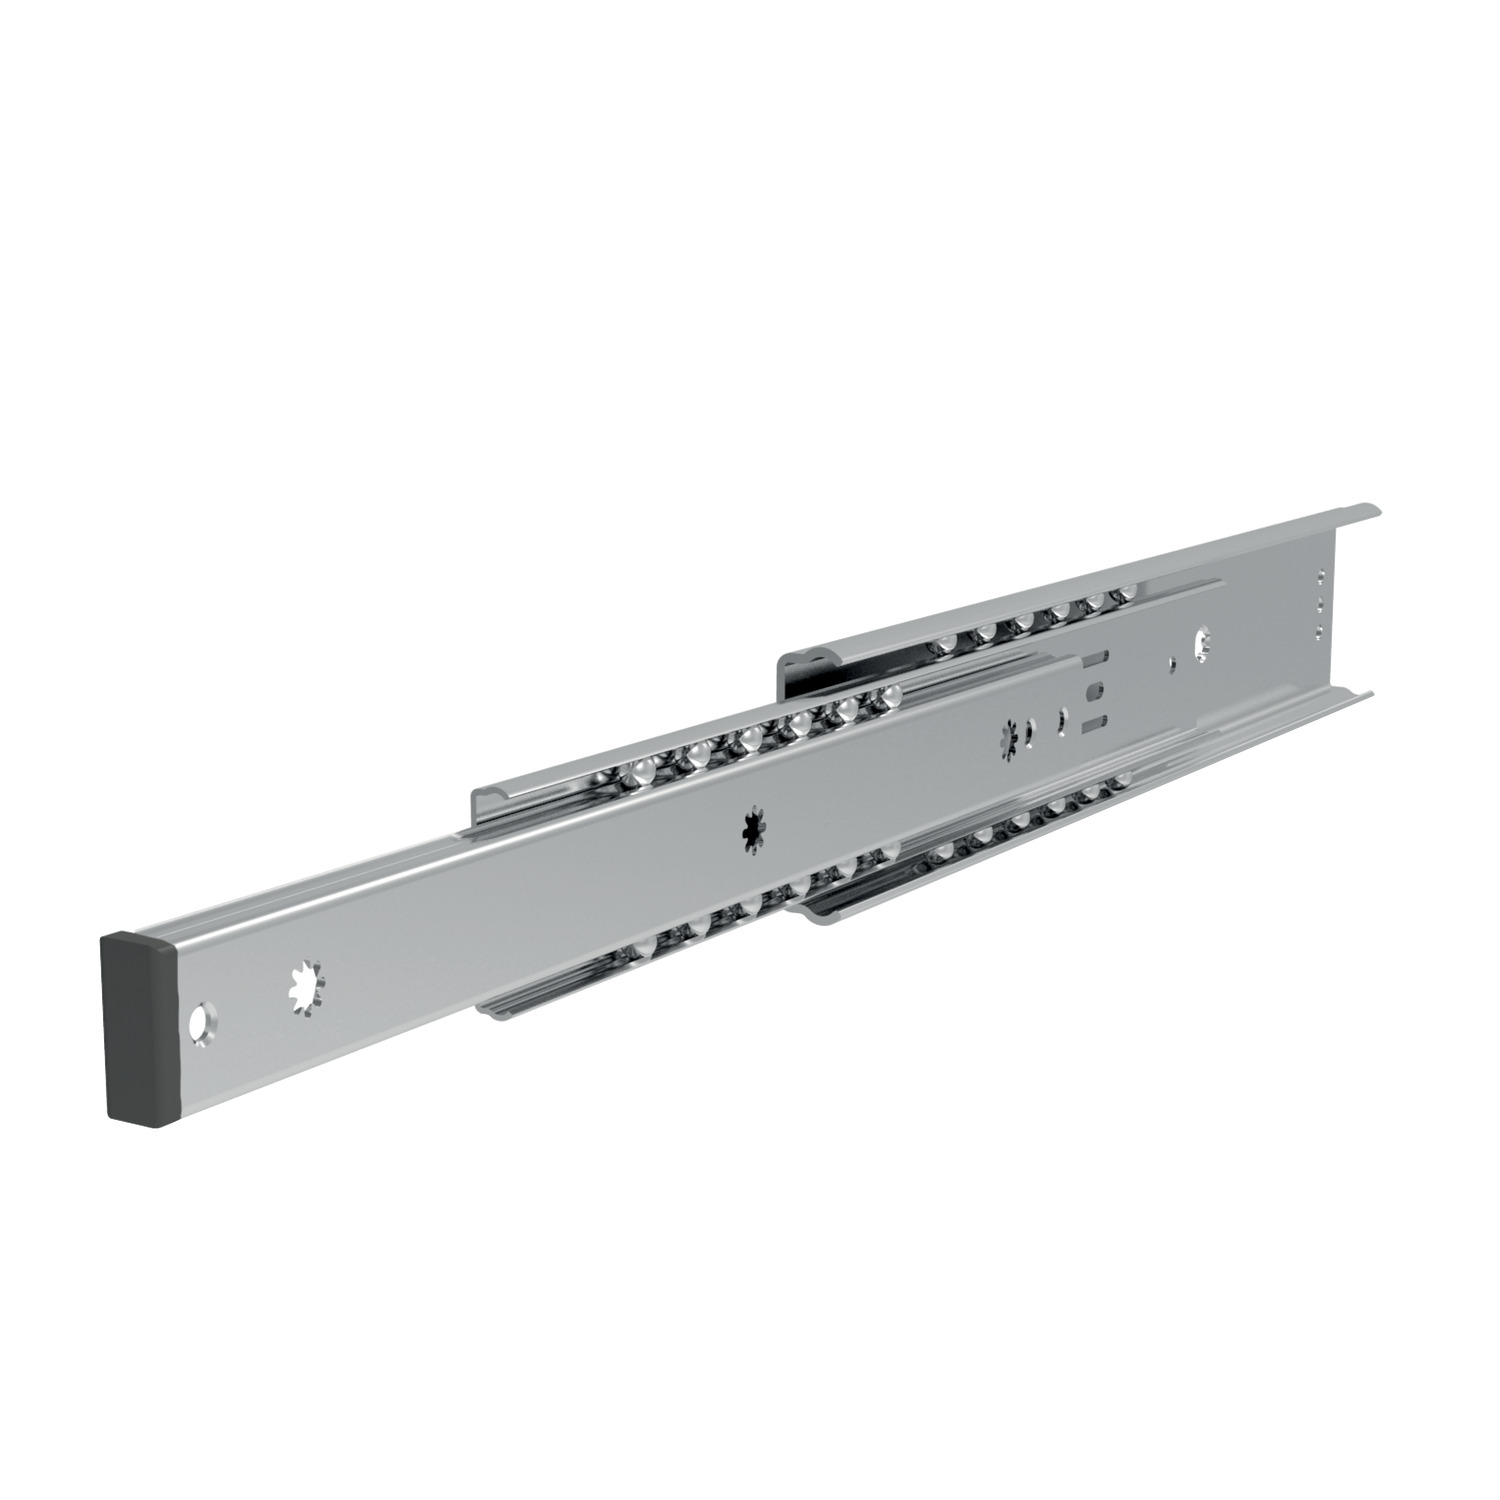 Fully Telescopic Drawer Slide Galvanized steel fully telescopic drawer slides. Friction locked in closed position. Fix rail with M4 countersunk screws. loads up to 40kg per pair.